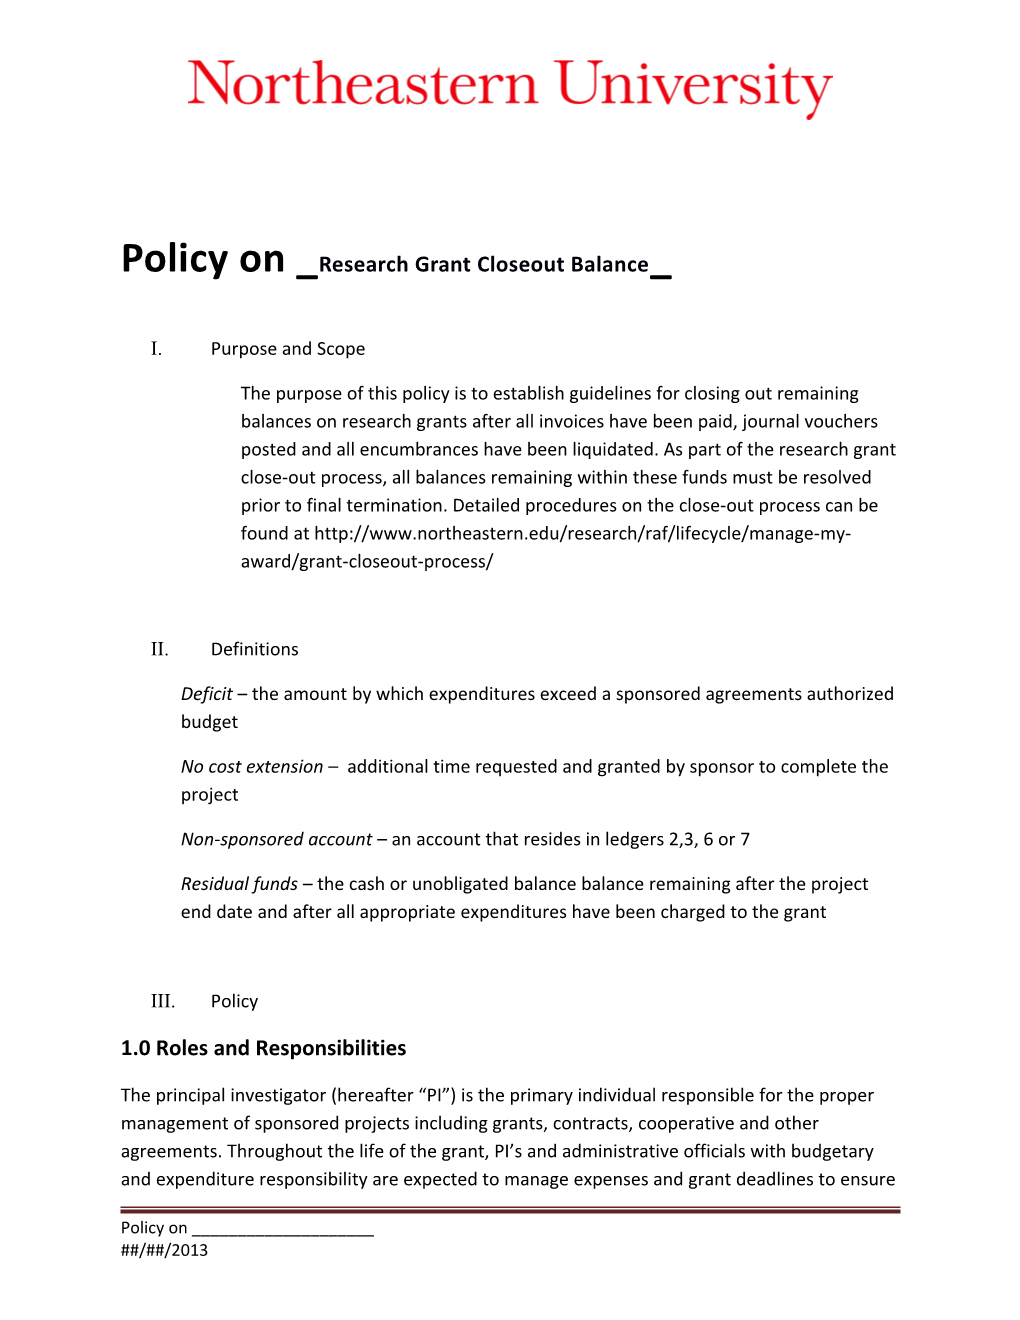 Policy on Research Grant Closeout Balance